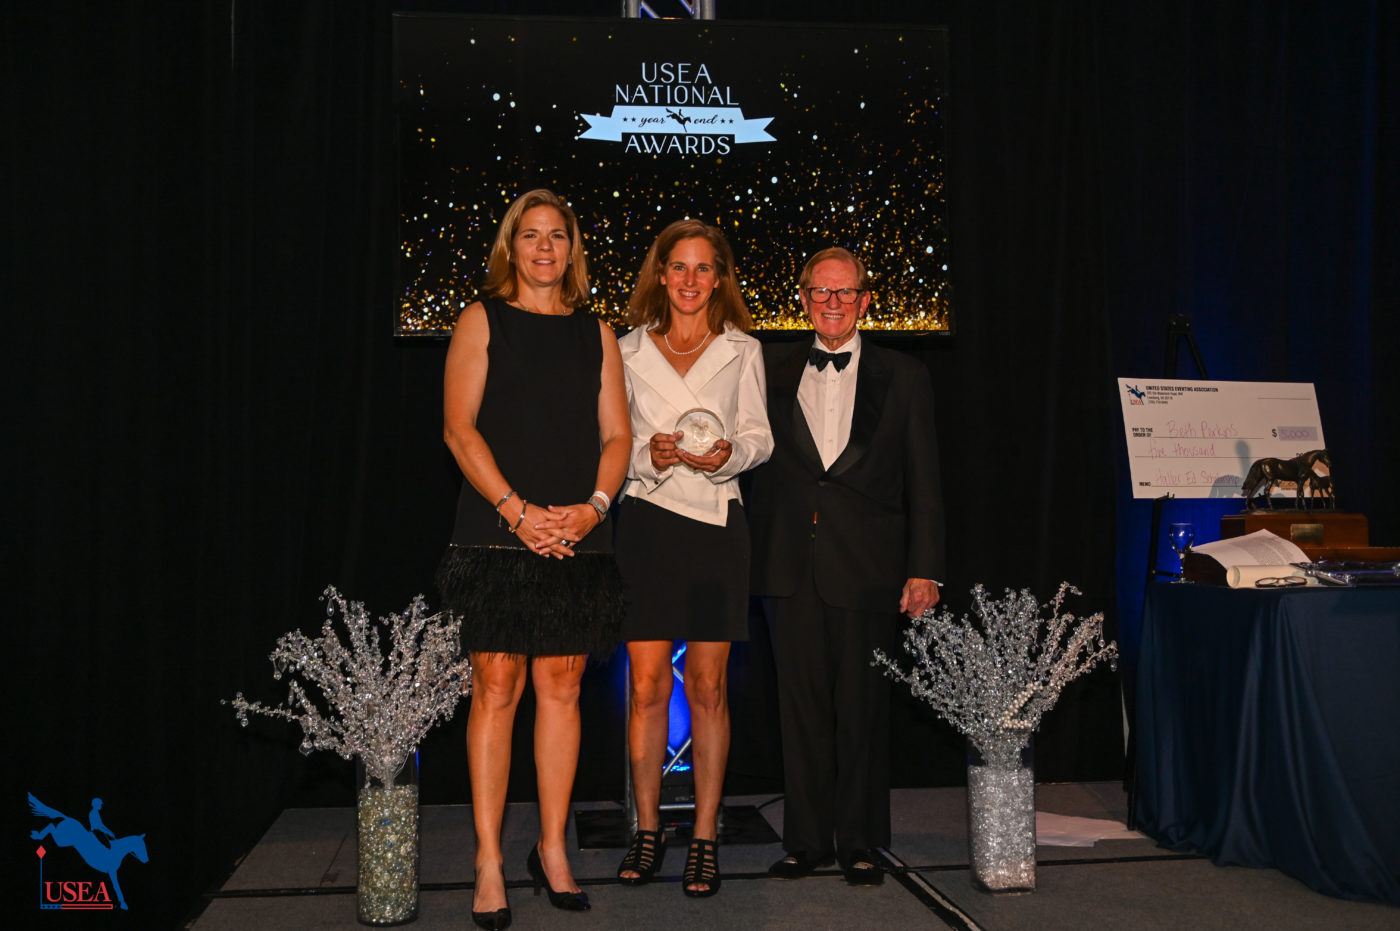 Liz Messaglia was honored with the Amateur Impact Award